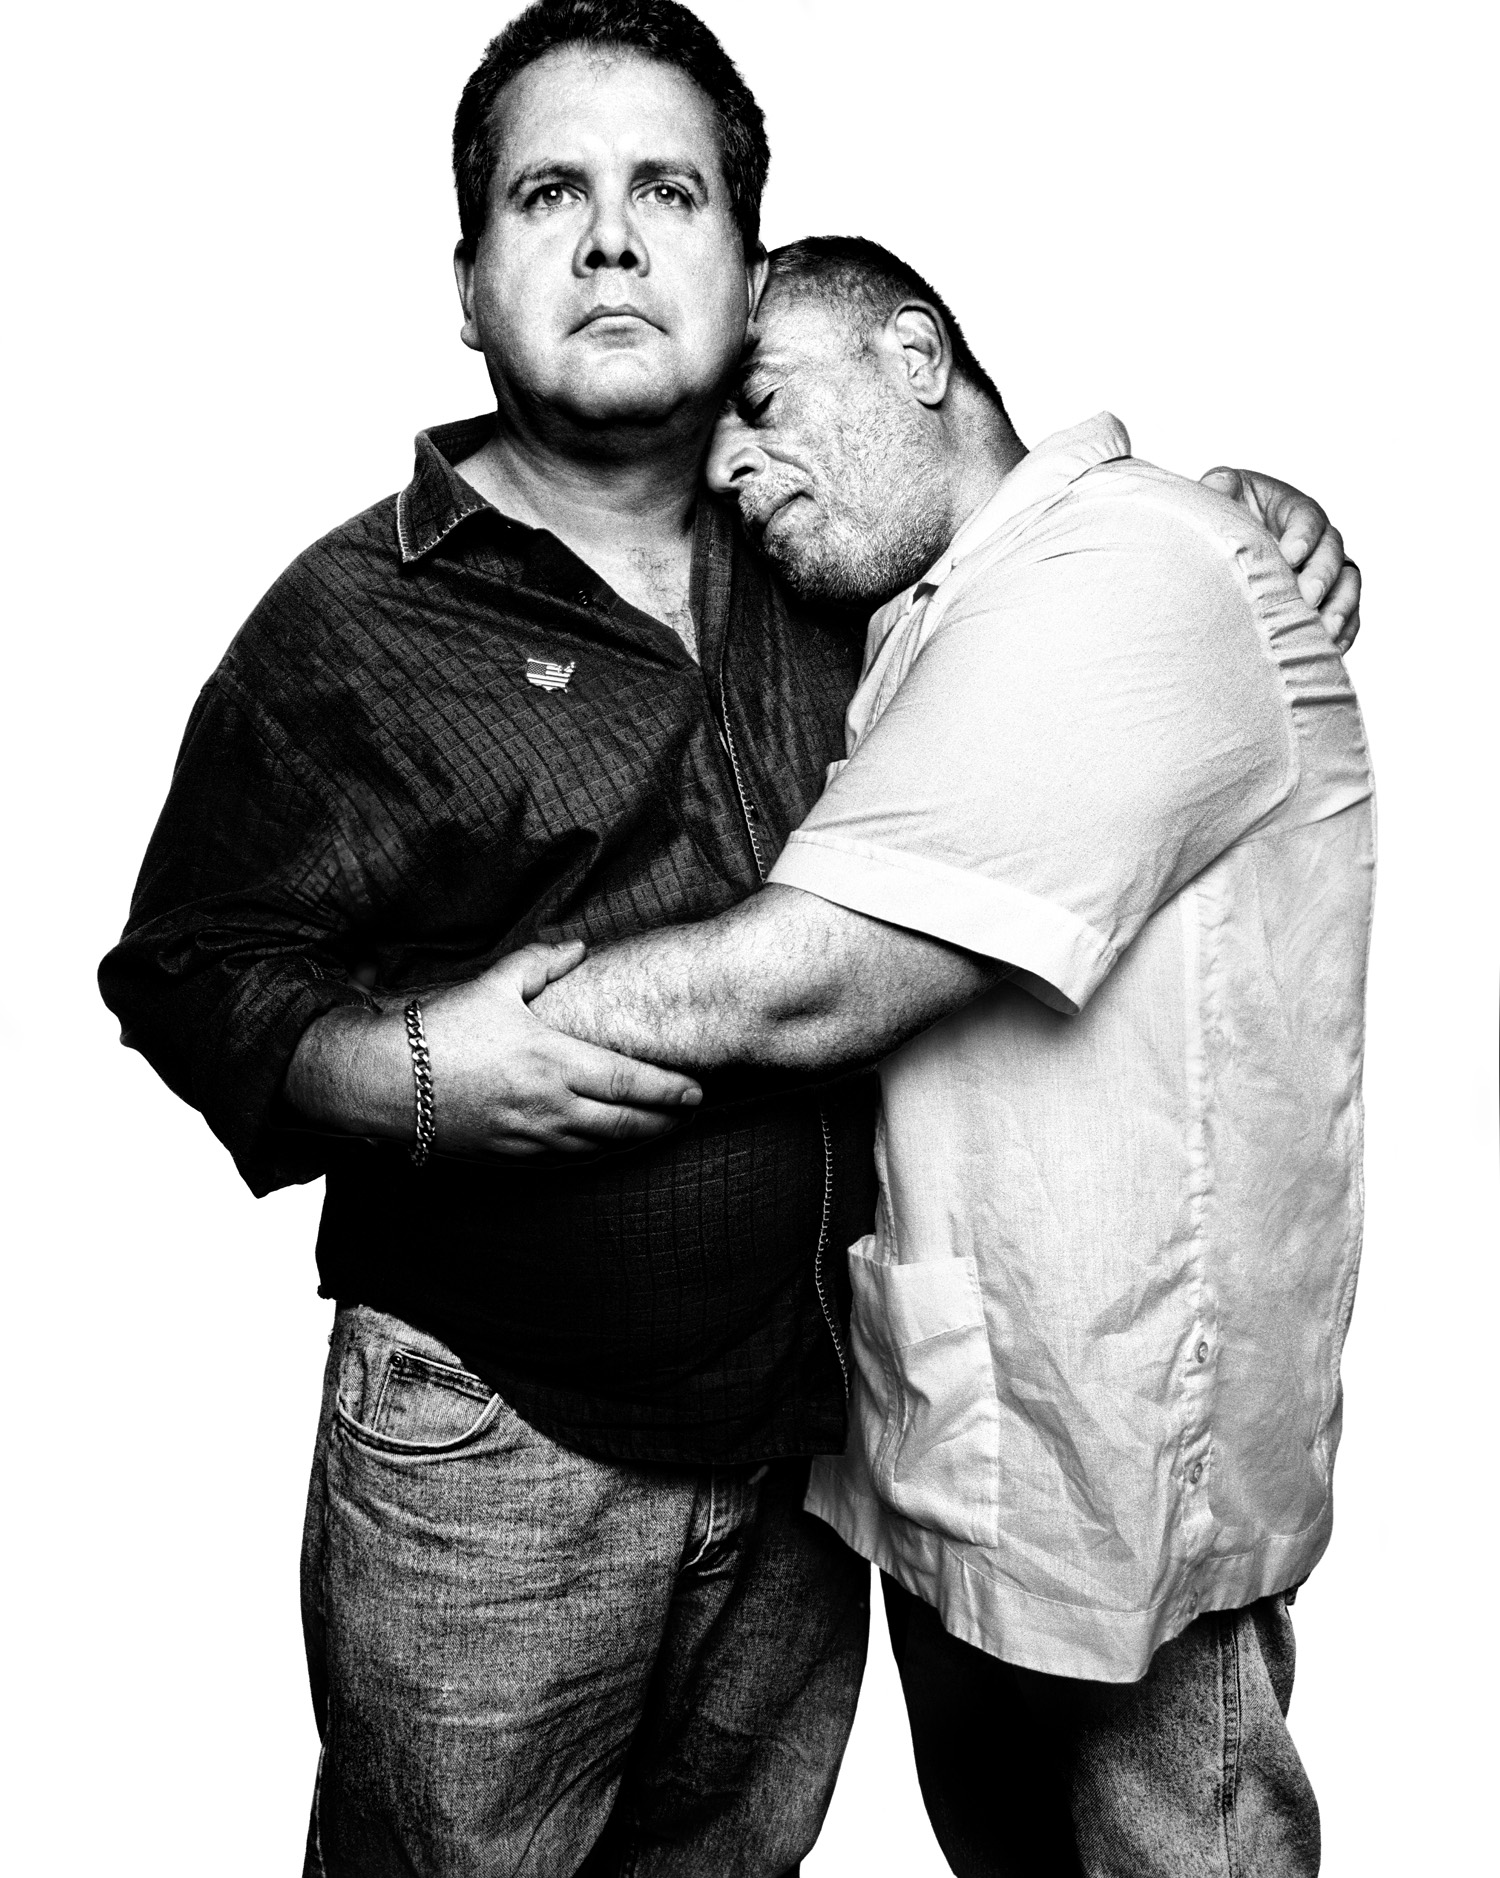 Pablo Garcia Gamez, 52 | 
                              New York City | 
                              June 14, 2013
                              
                              Garcia Gamez, left, a Venezuelan, and his partner of 20 years, Santiago Ortiz, a Puerto Rican, registered as domestic partners in New York City in 1993. They were married in Connecticut in 2011, and Garcia Gamez gained permanent resident status in 2013, he says.